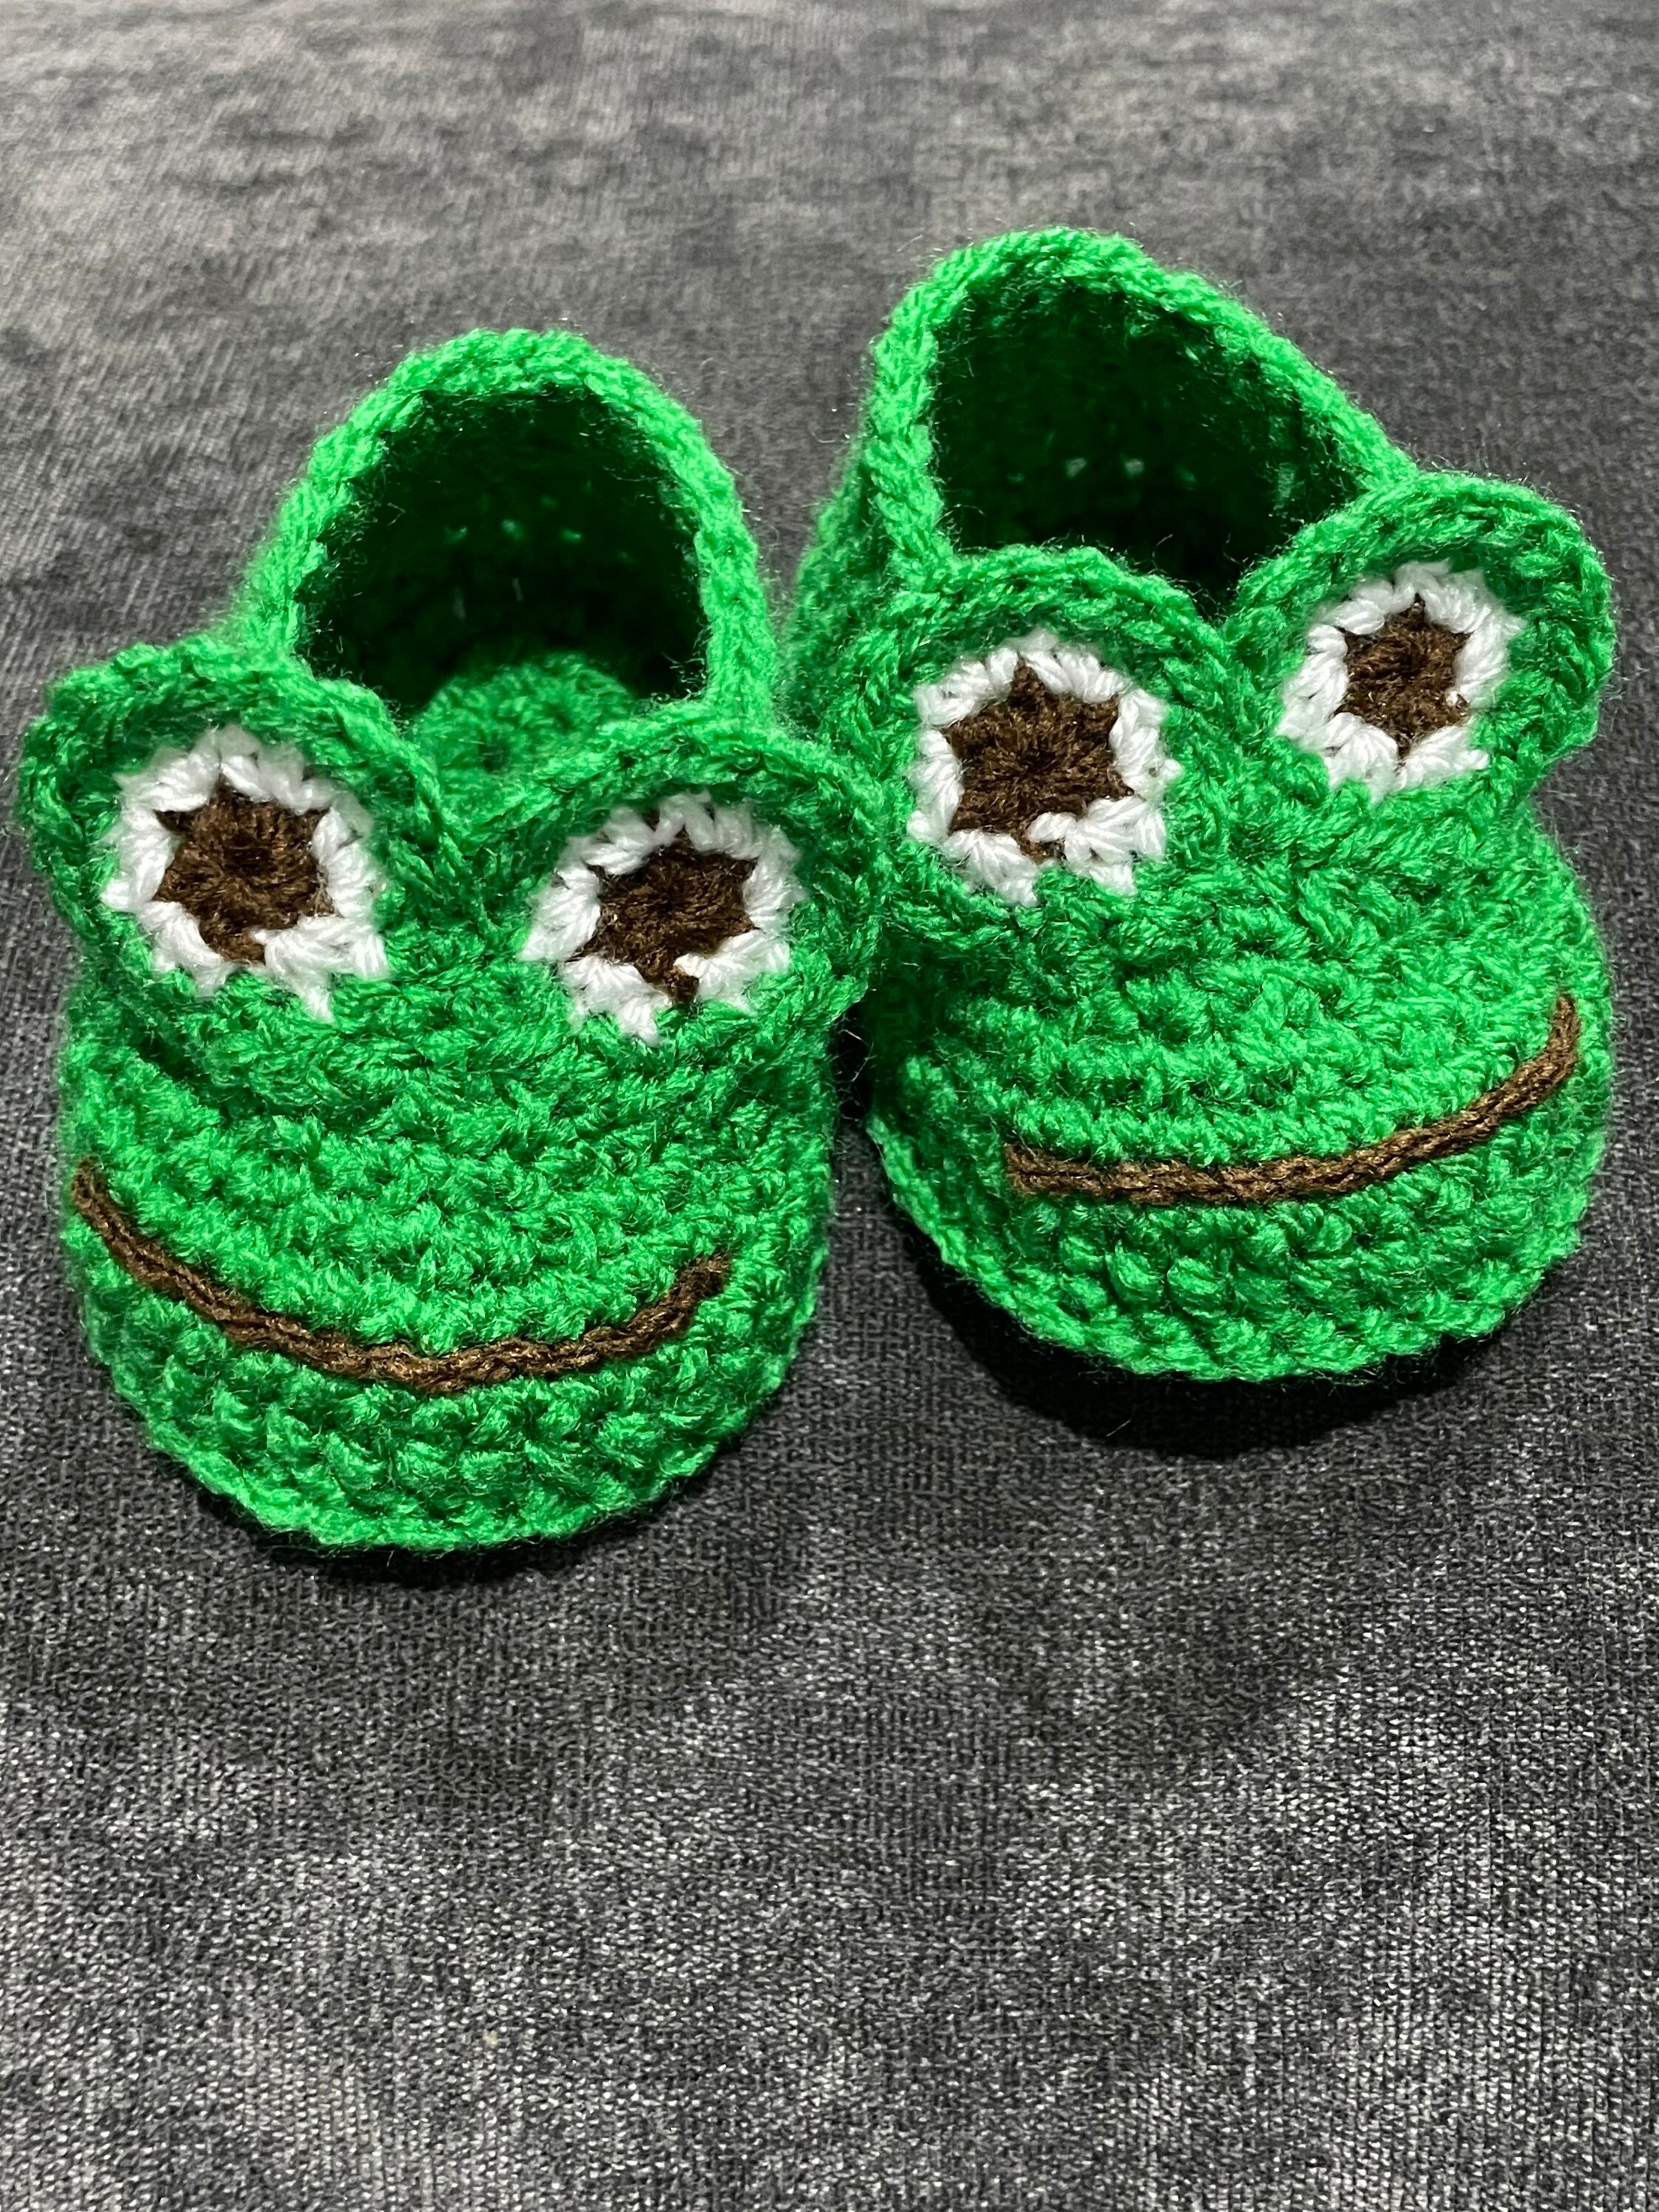 Generic DIY Frog Slippers Sewing Kit for Kids 4-7 à prix pas cher